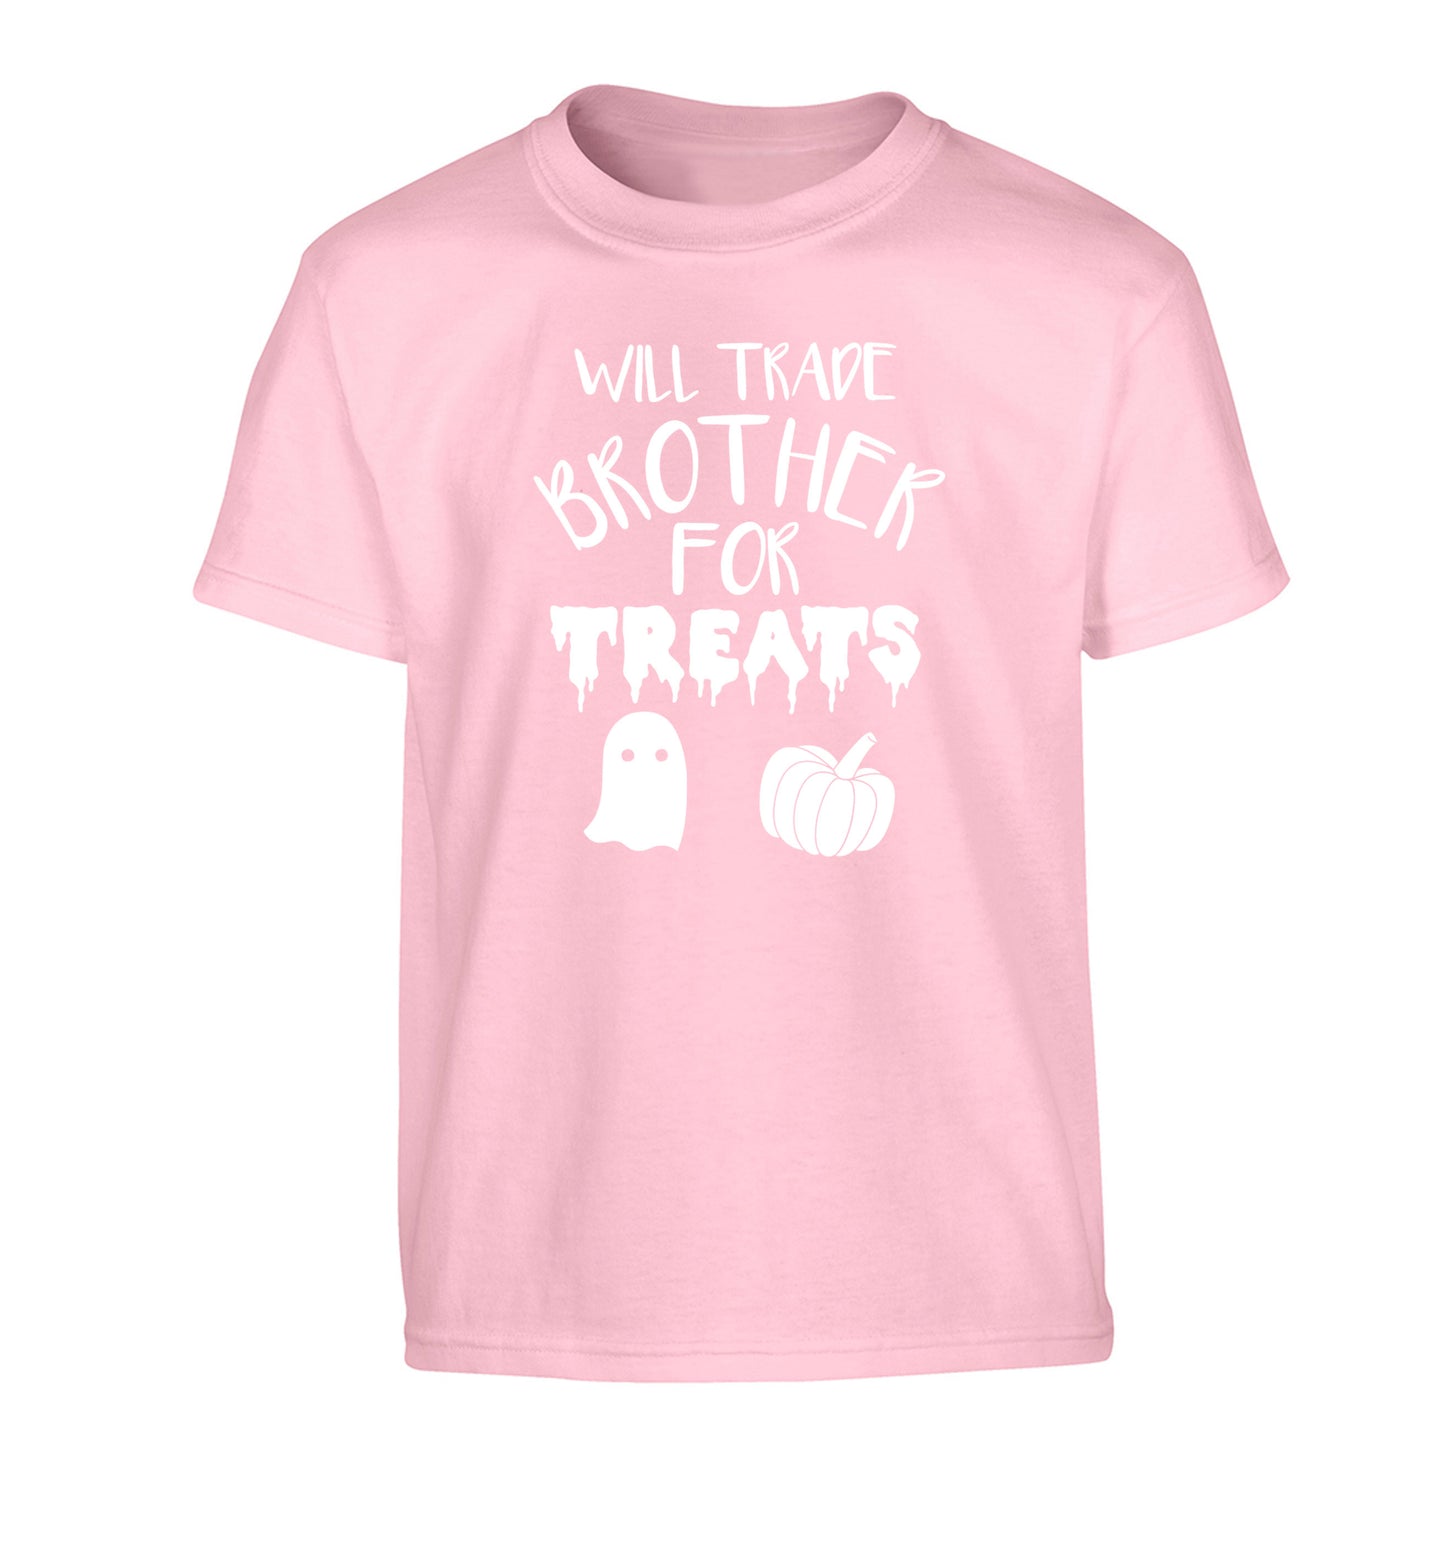 Will trade brother for treats Children's light pink Tshirt 12-14 Years